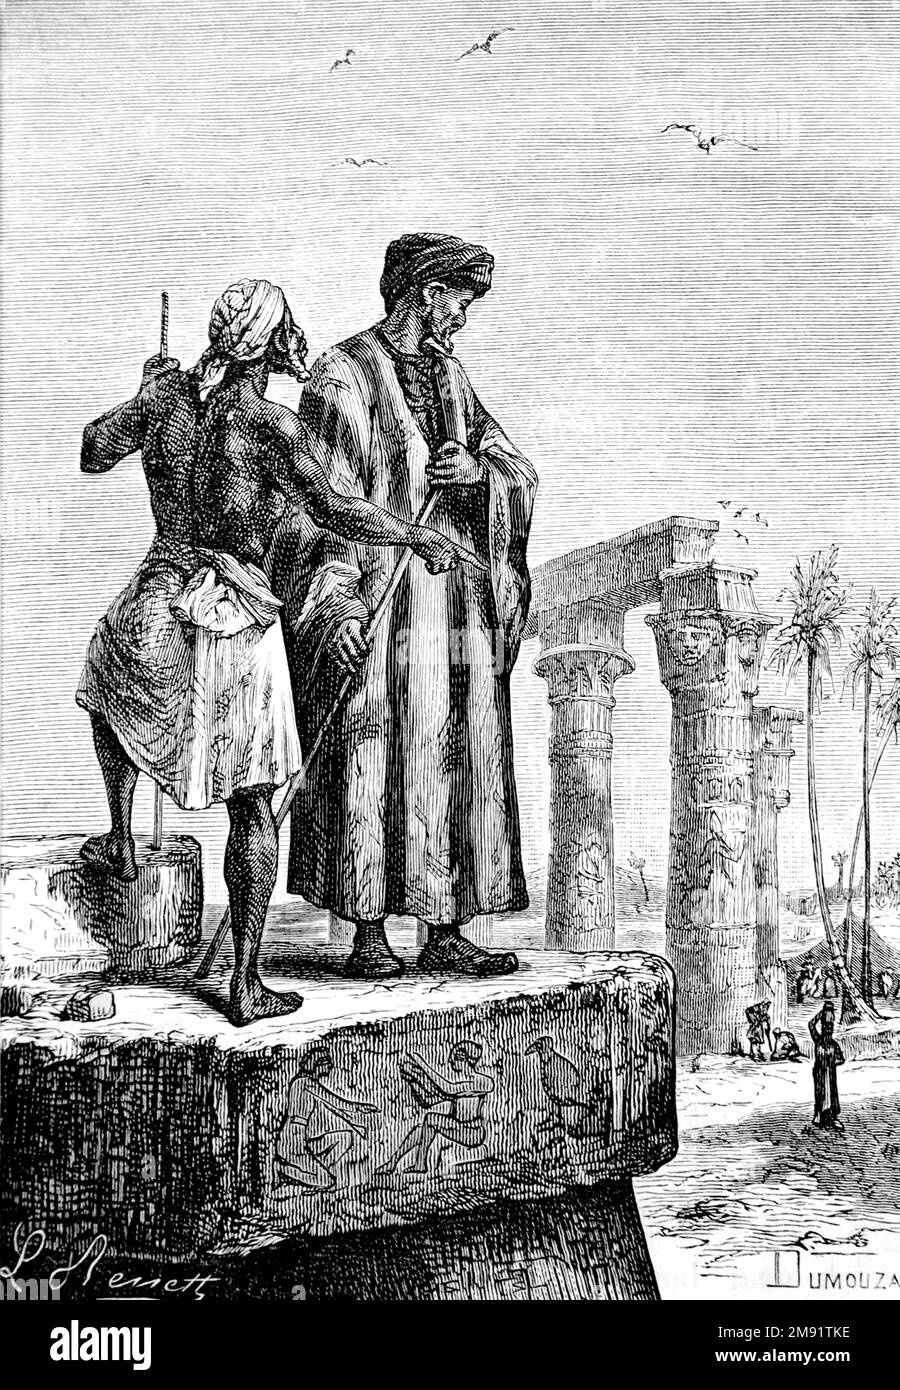 Ibn Battuta (on right). Illustration of the Berber Maghrebi scholar and explorer, Abu Abdullah Muhammad ibn Battutah (1304-1368/1369), engraving by Léon Benett from an essay by Jules Verne entitled 'Découverte de la terre' ('Discovery of the Earth'), 1878 Stock Photo